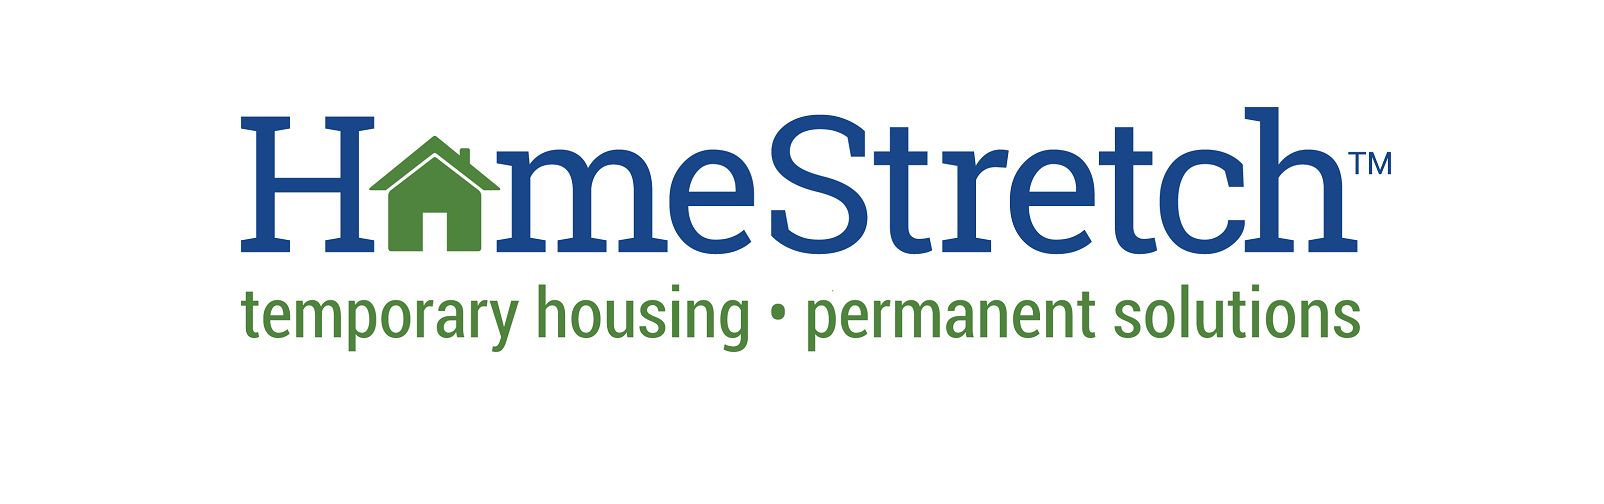 Homeless Families Shelter, Services at HomeStretch